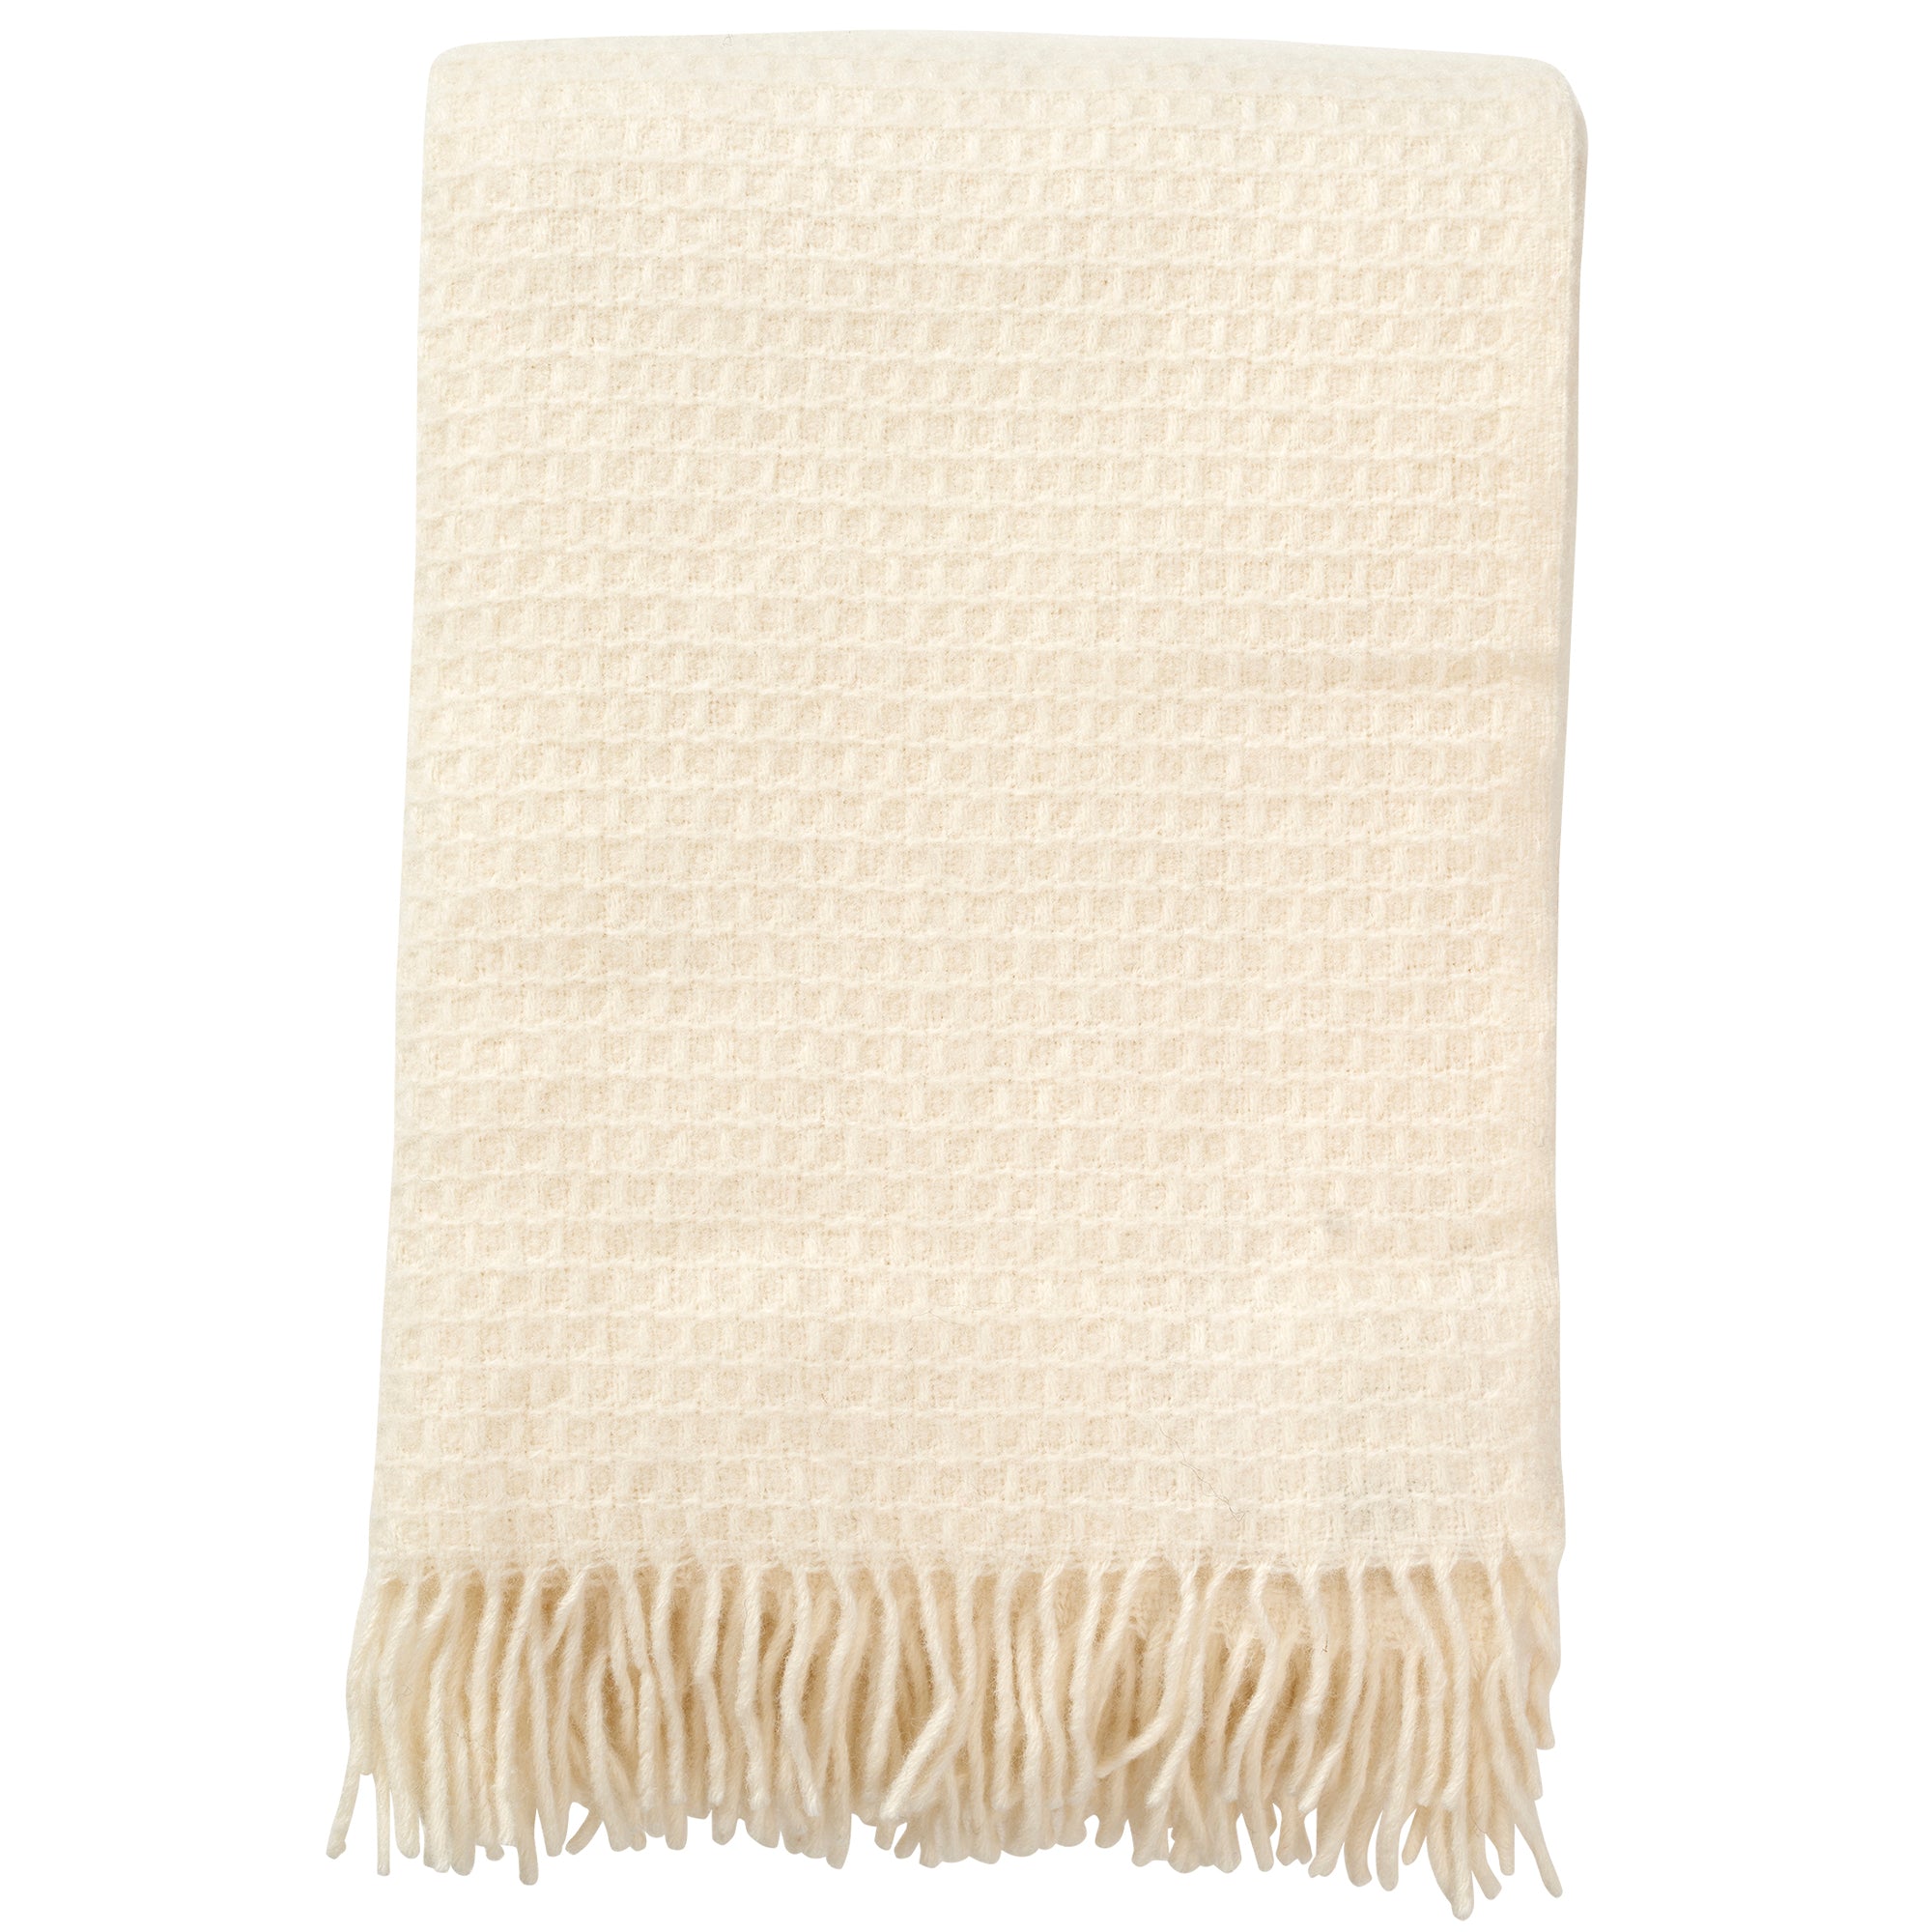 Knut Natural White 130x200cm Lambswool Throw